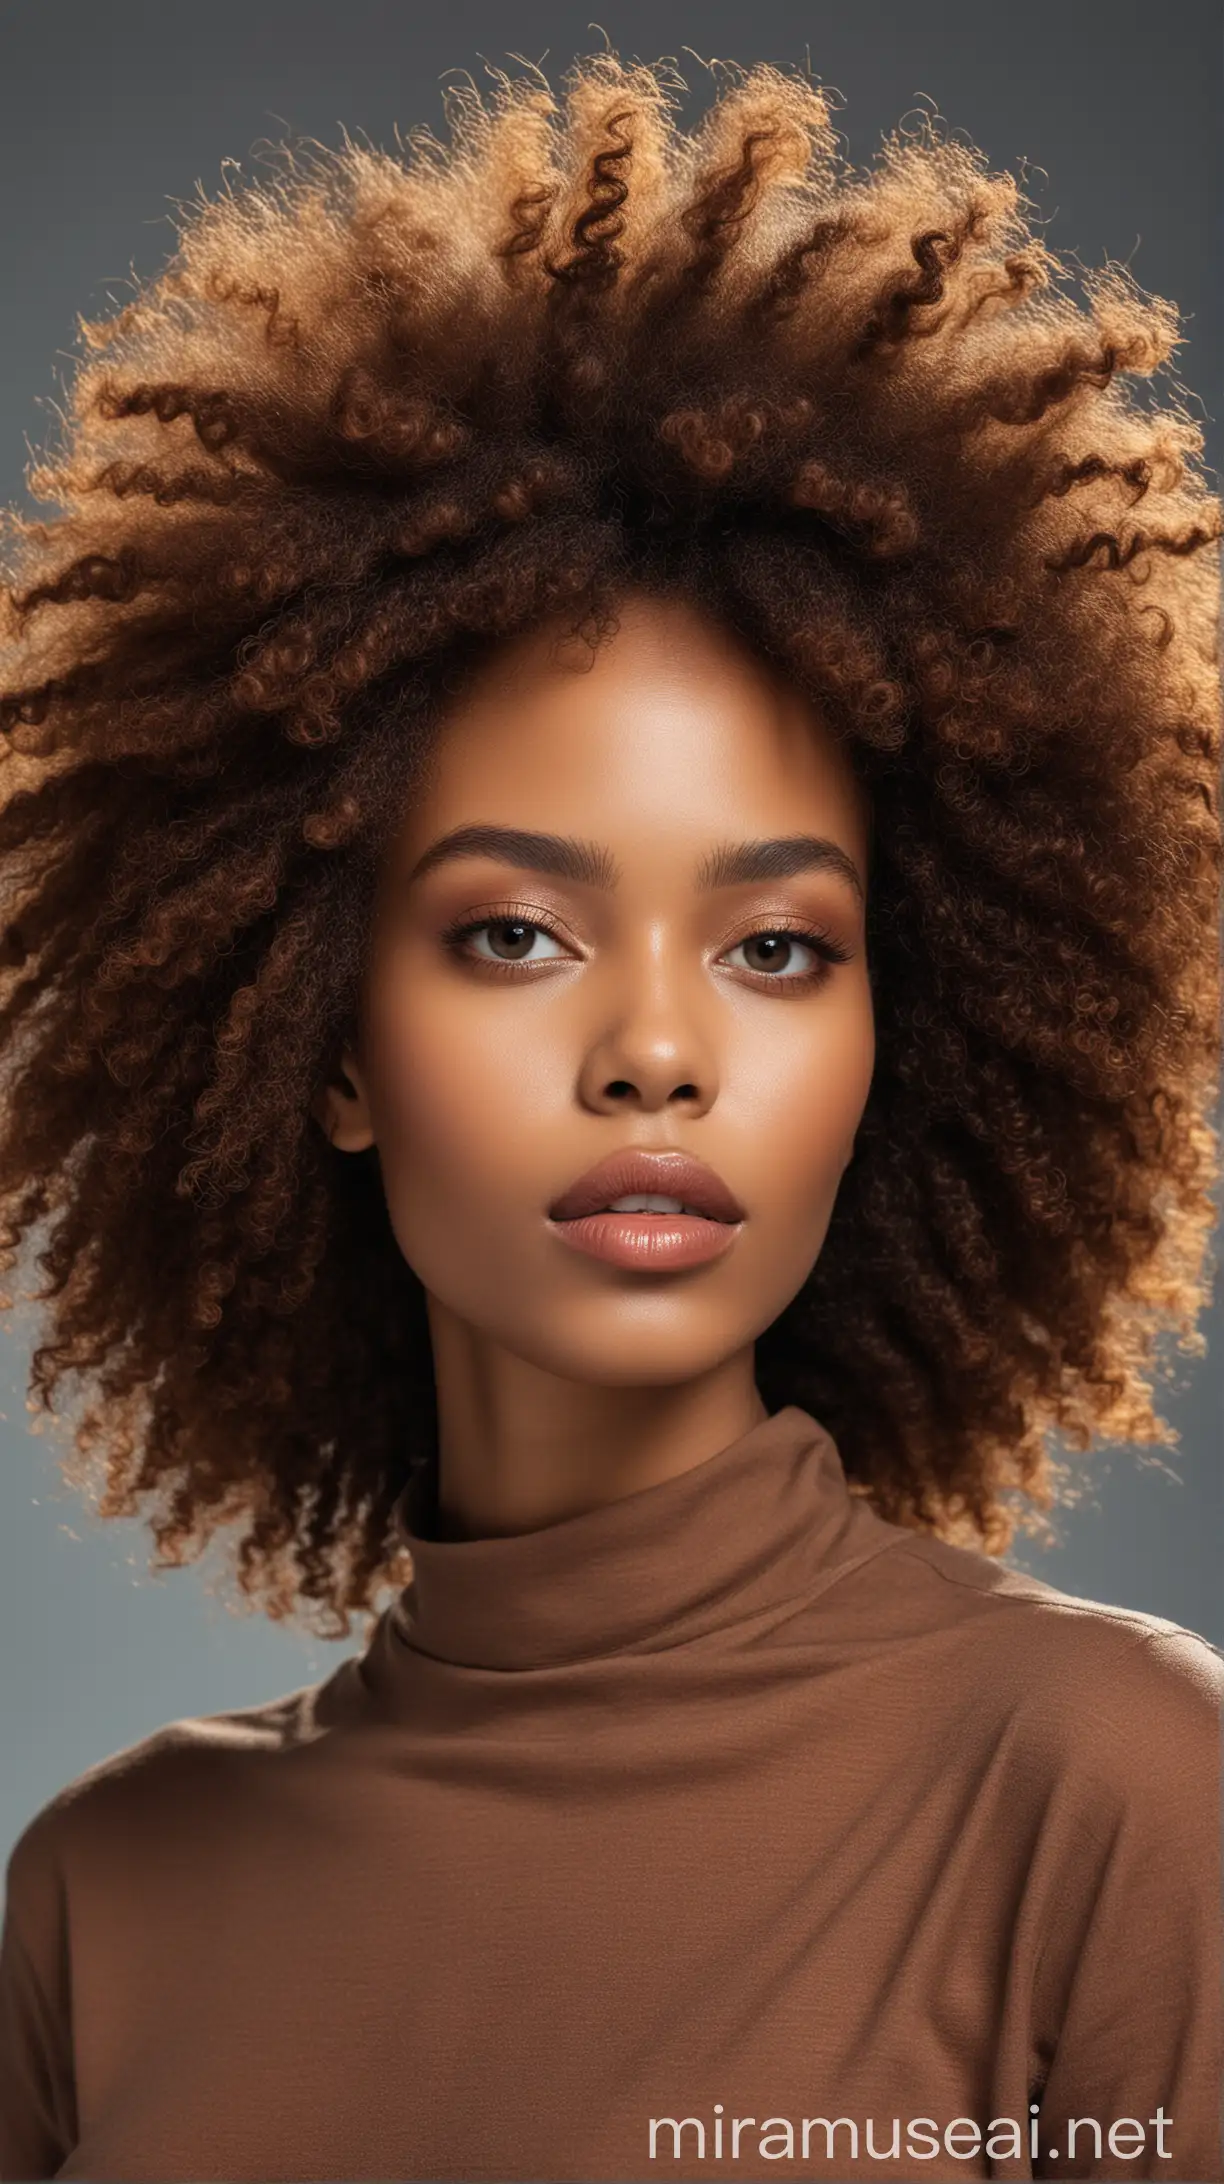 Spectacular model with healthy Afro hair